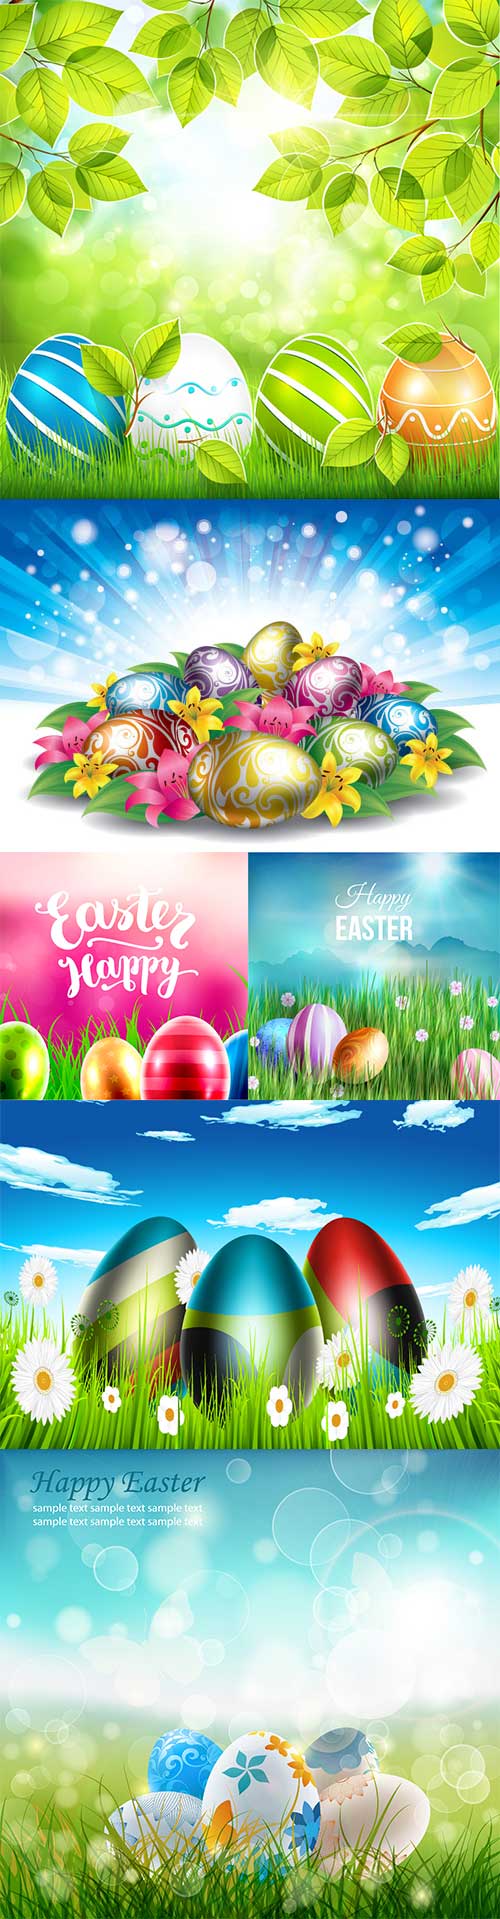 Happy Easter greeting cards and backgrounds vector